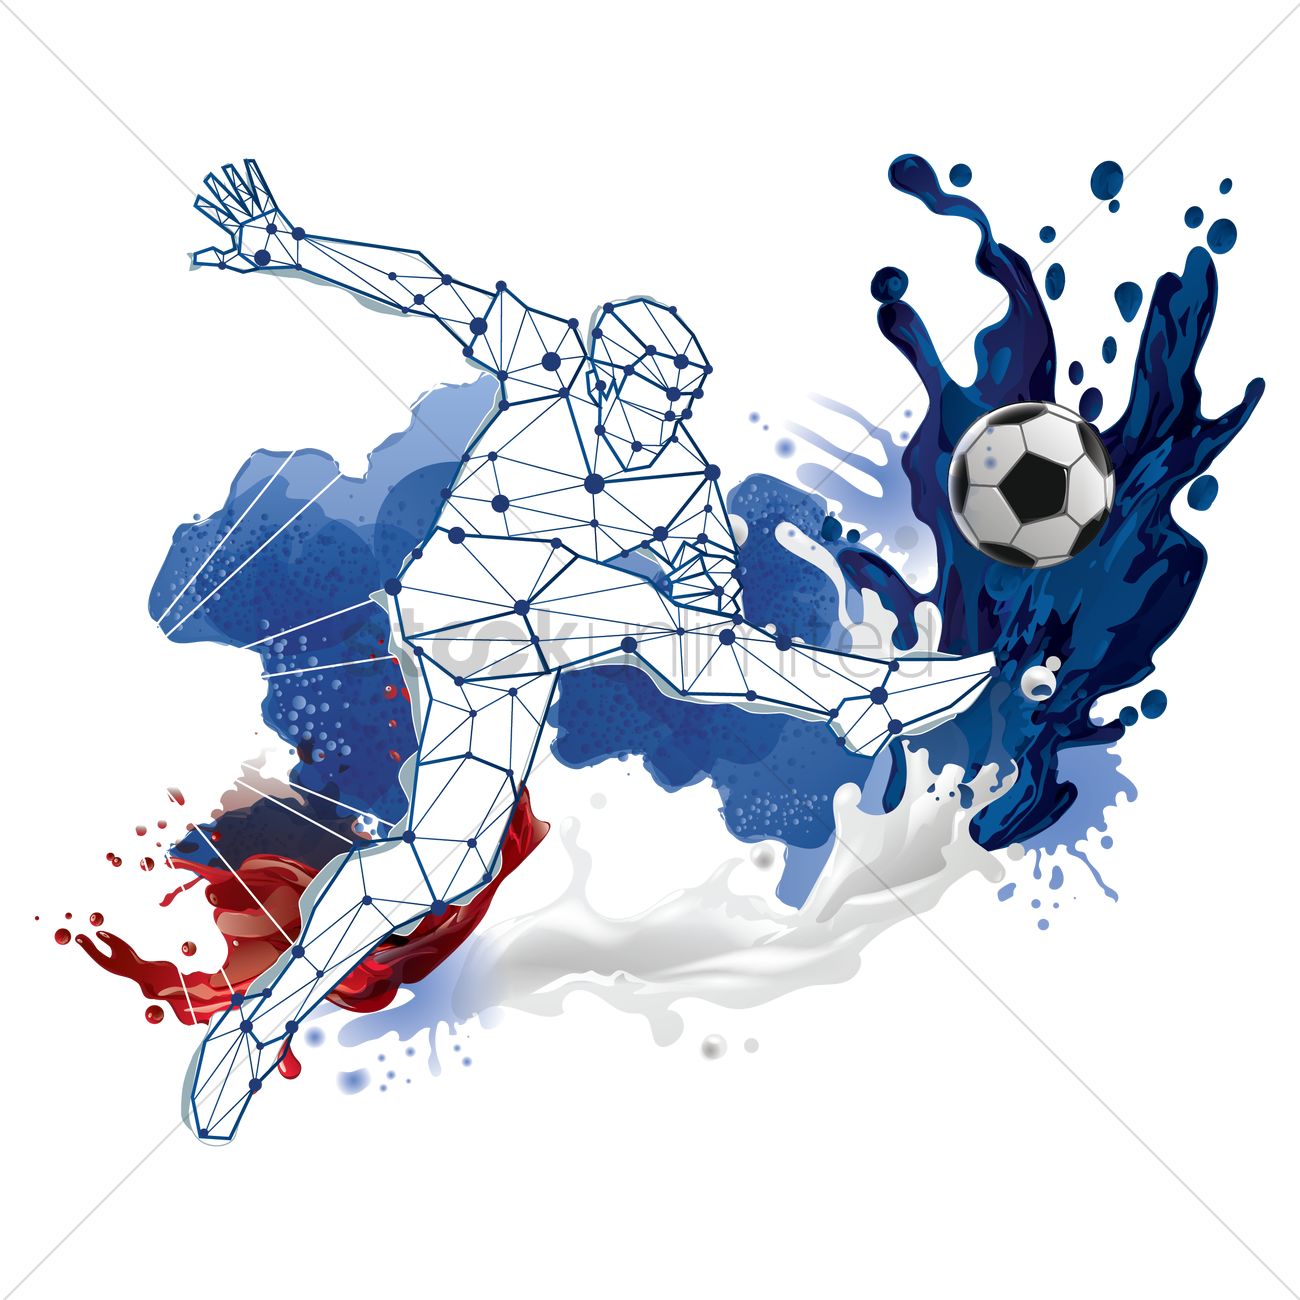 Soccer player silhouette png